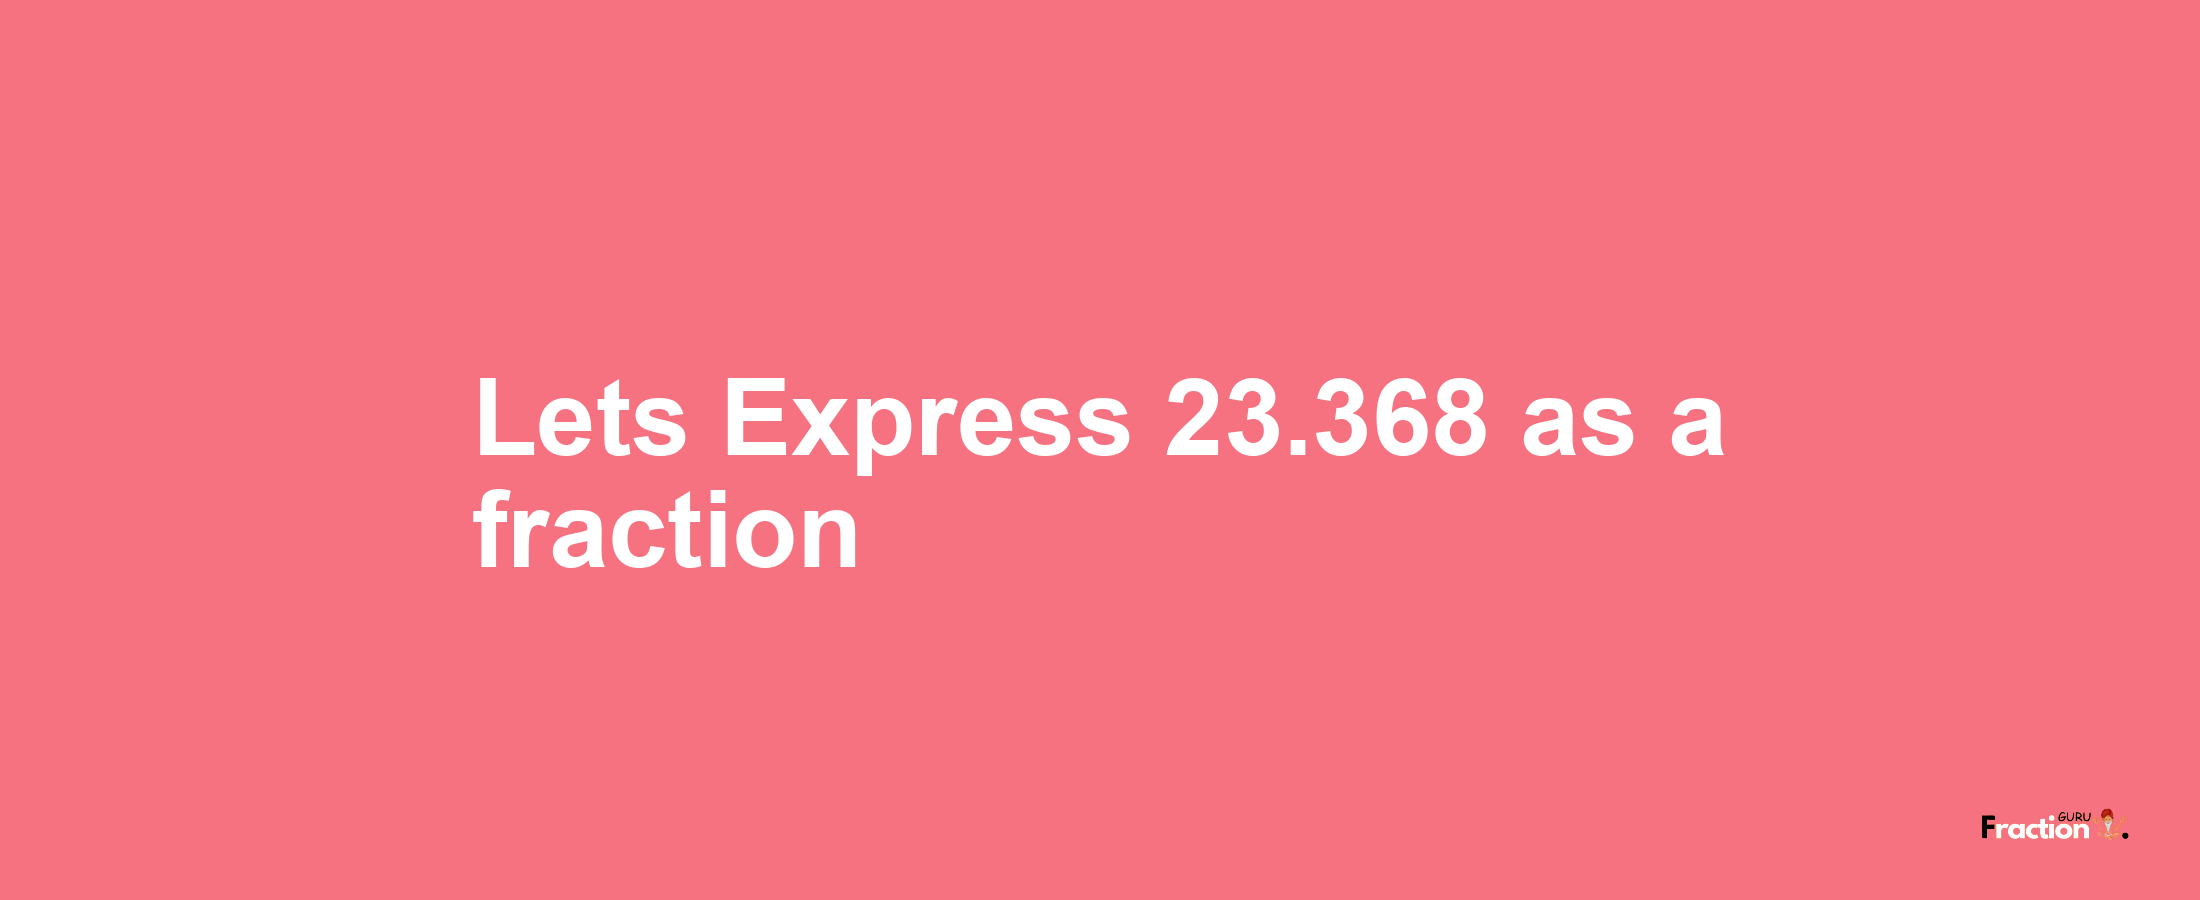 Lets Express 23.368 as afraction